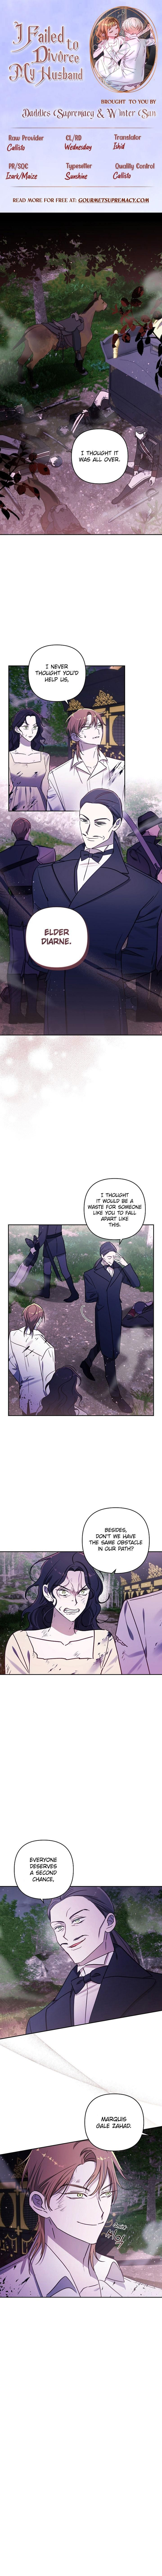 I am Afraid I have Failed to Divorce Chapter 69 page 1